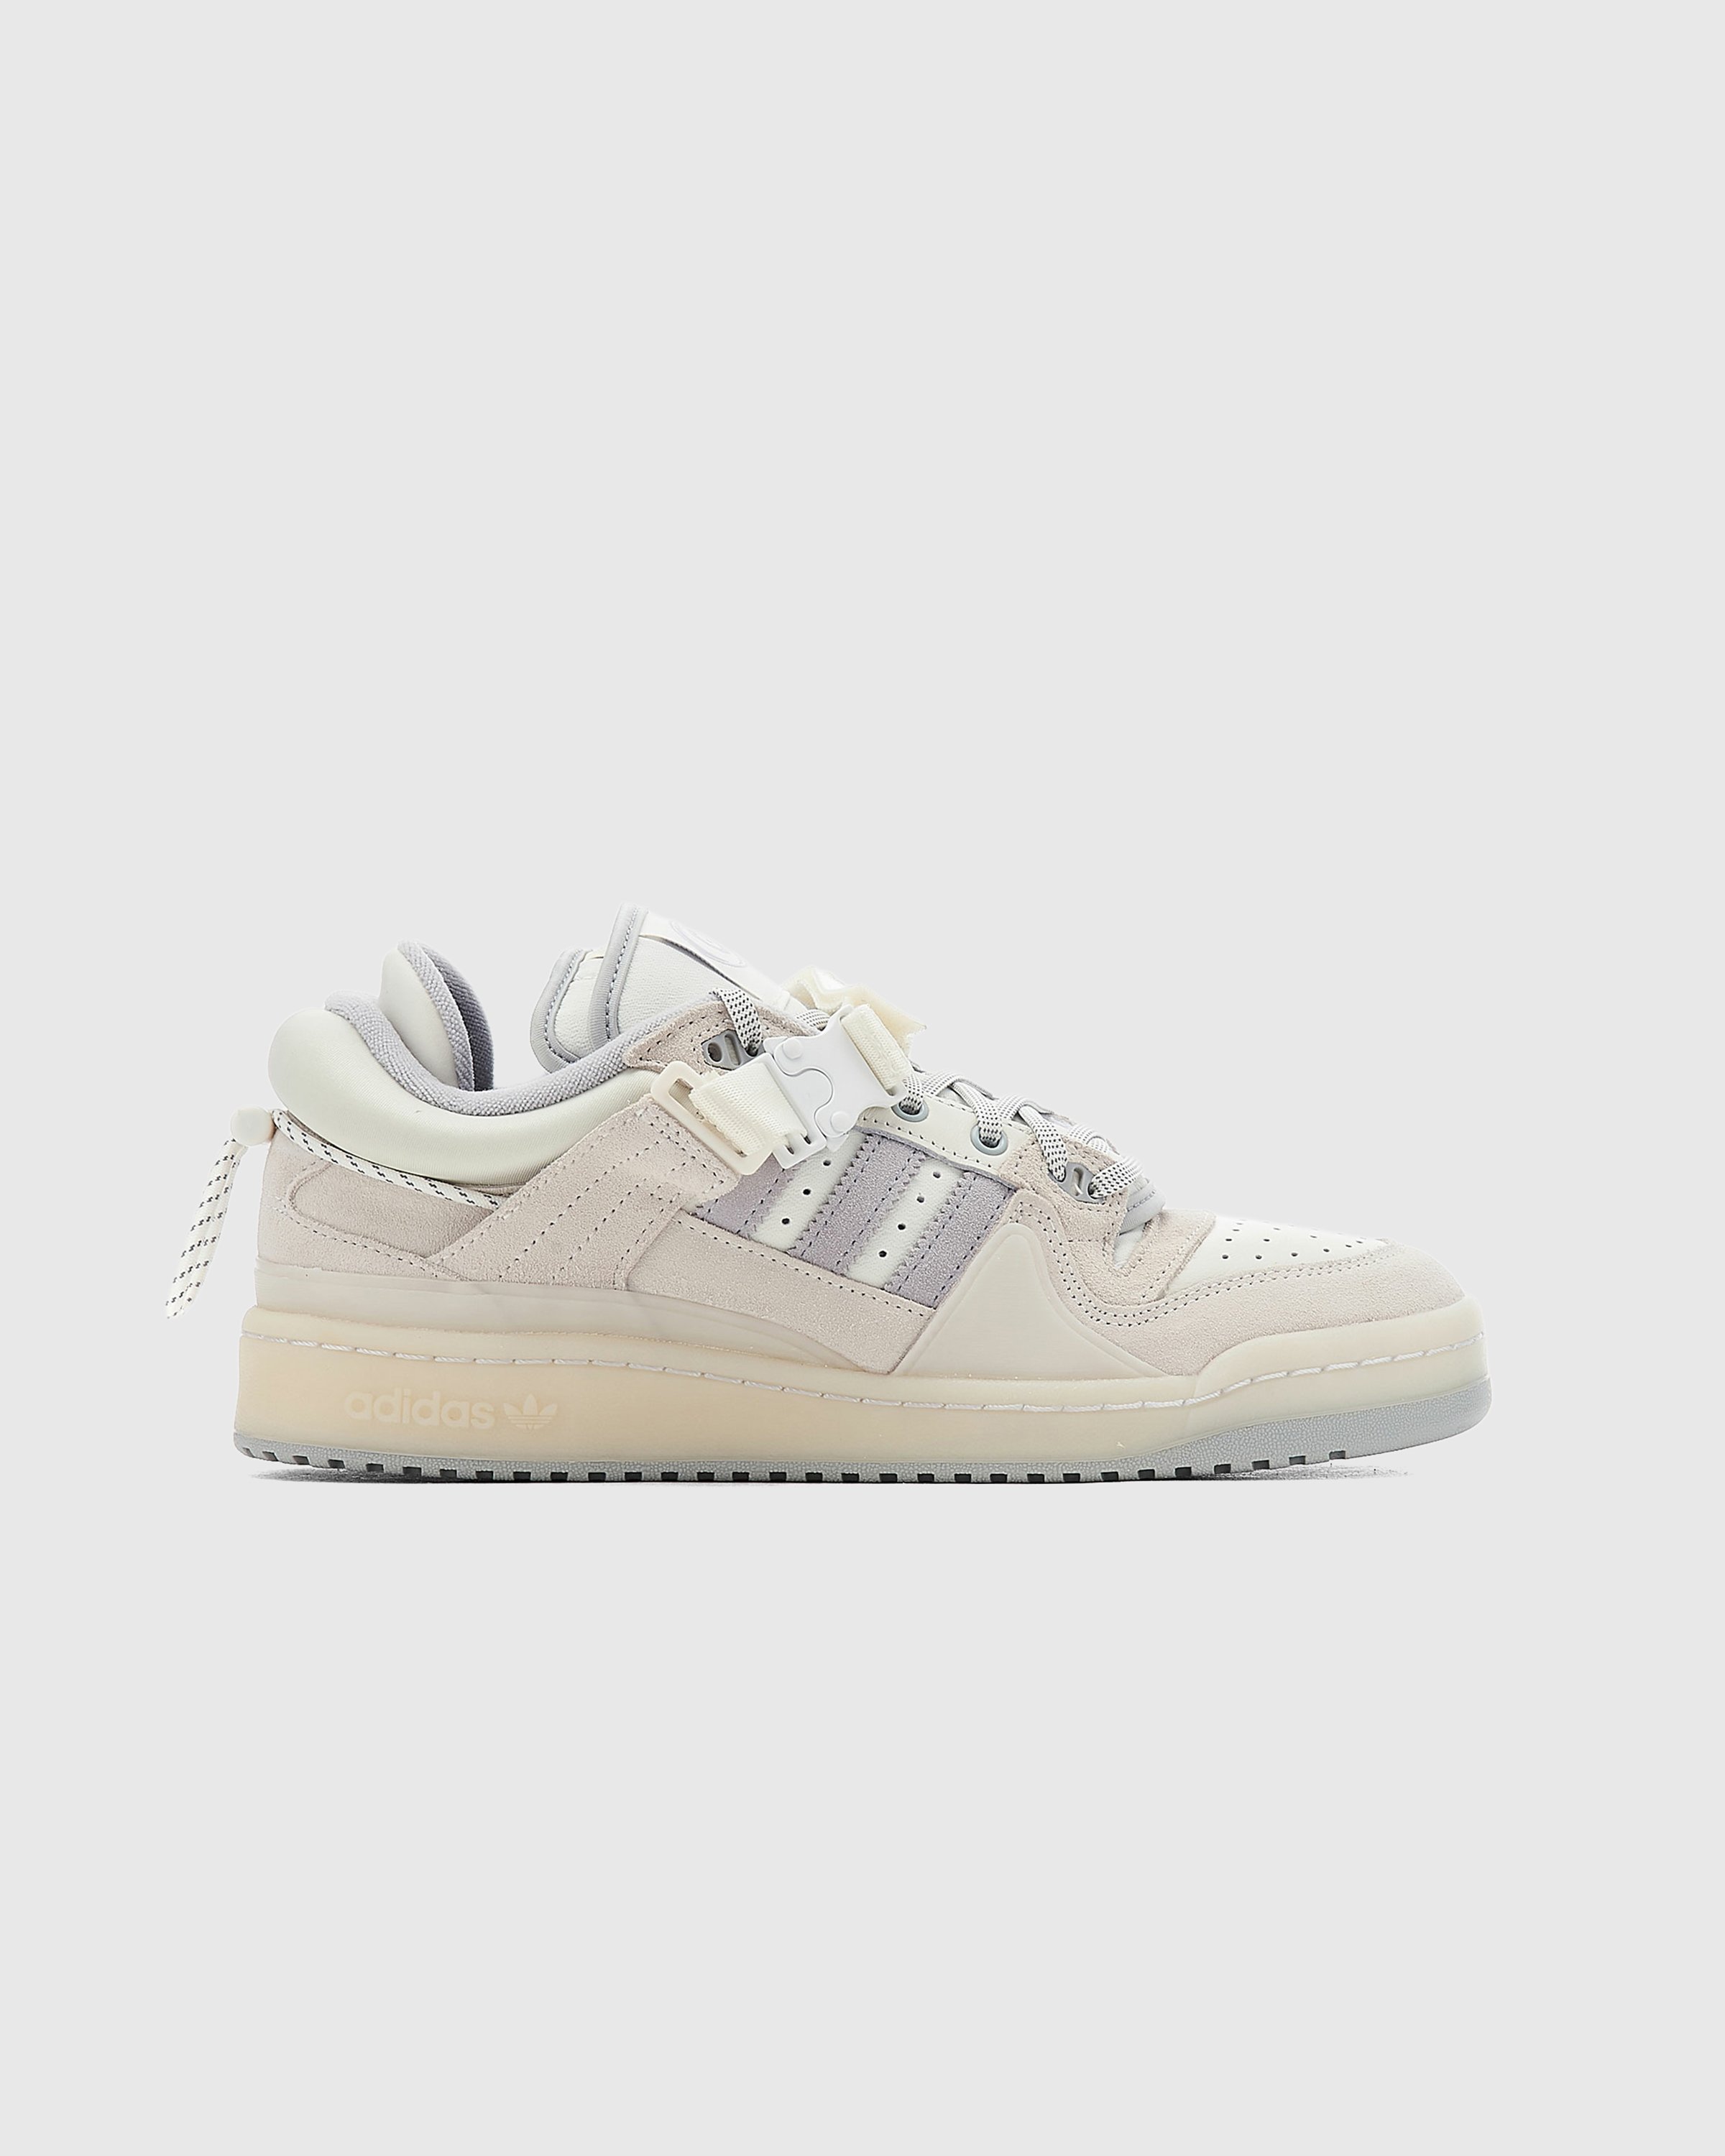 Adidas x Bad Bunny - Forum Low Cloud White/Clear Onix/Chalk White - Footwear - White - Image 1